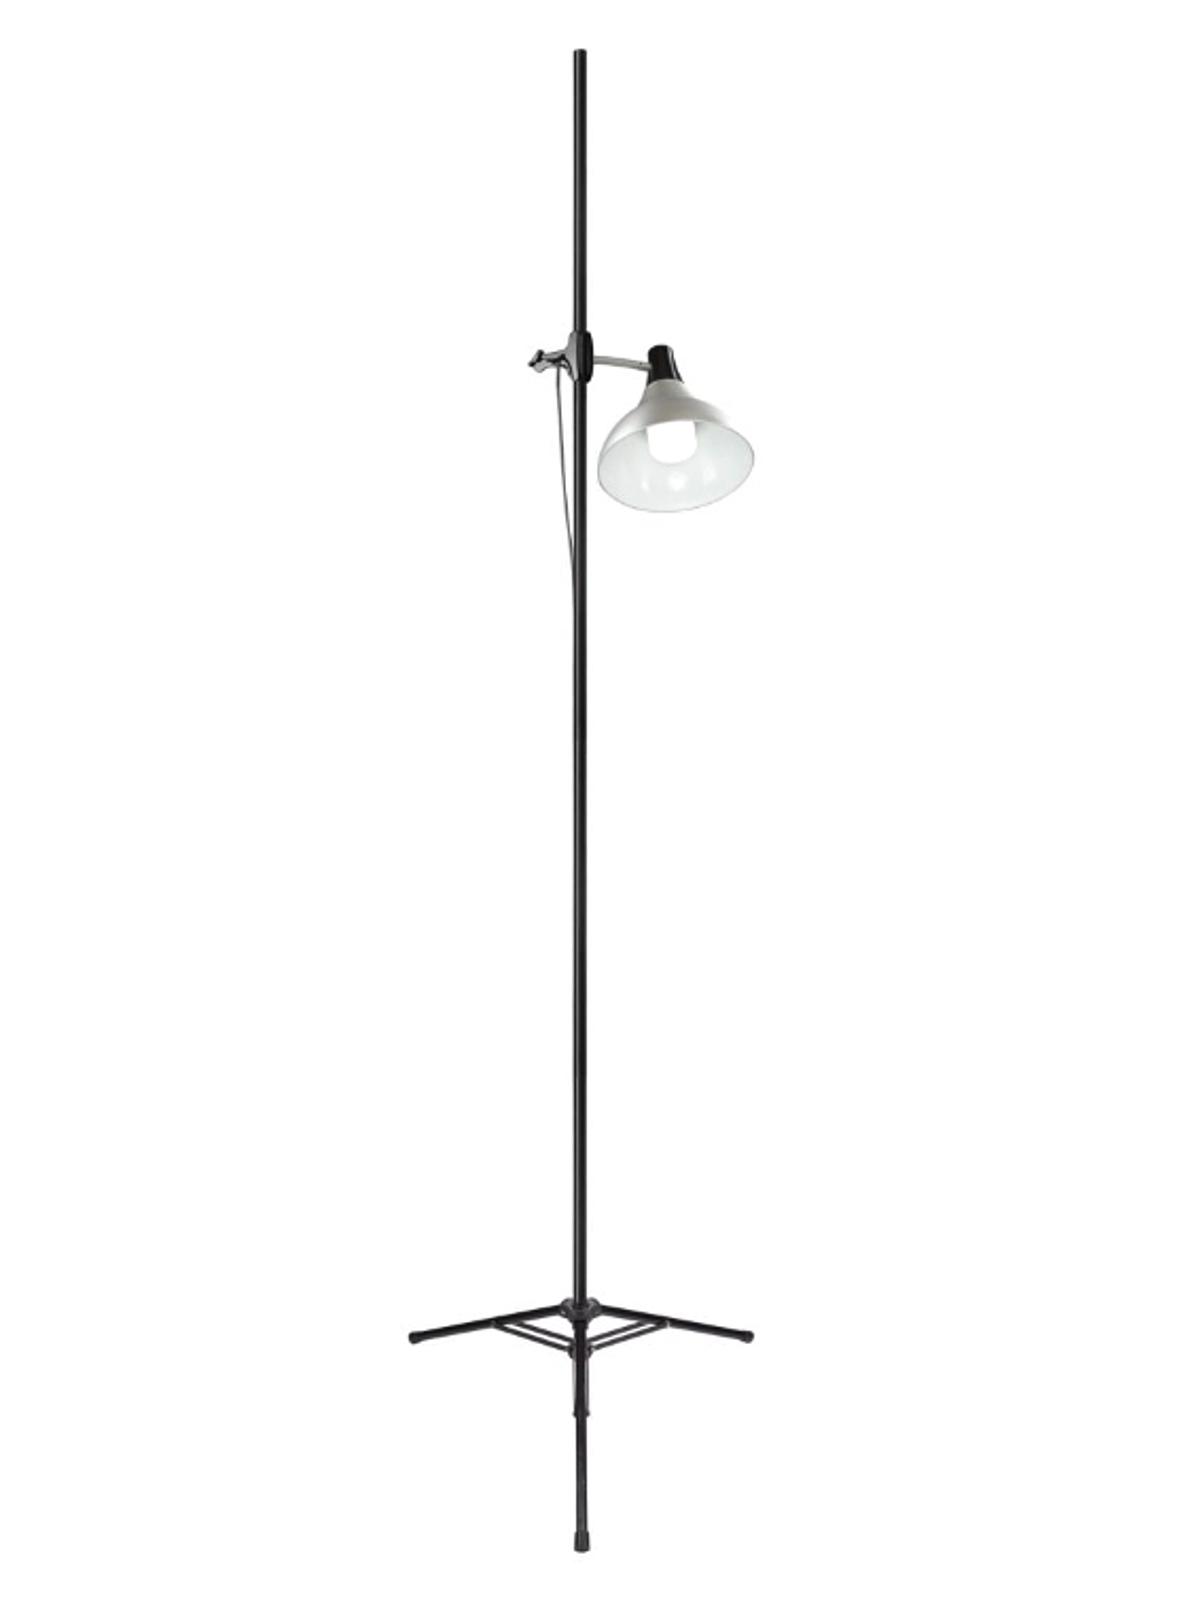 Artist Studio Lamp With Stand Each